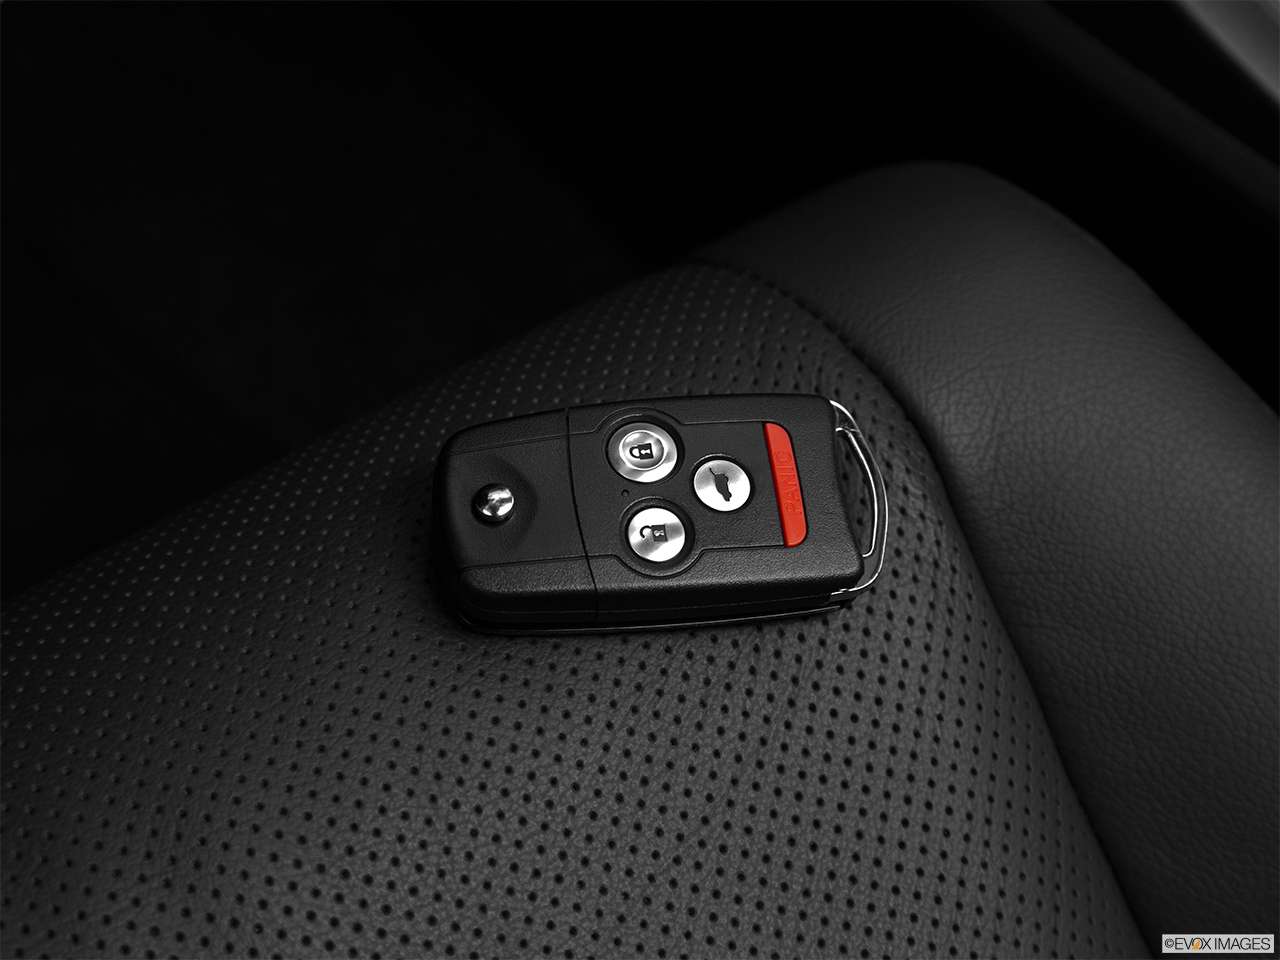 2011 Acura TSX Sport Wagon Key fob on driver's seat. 